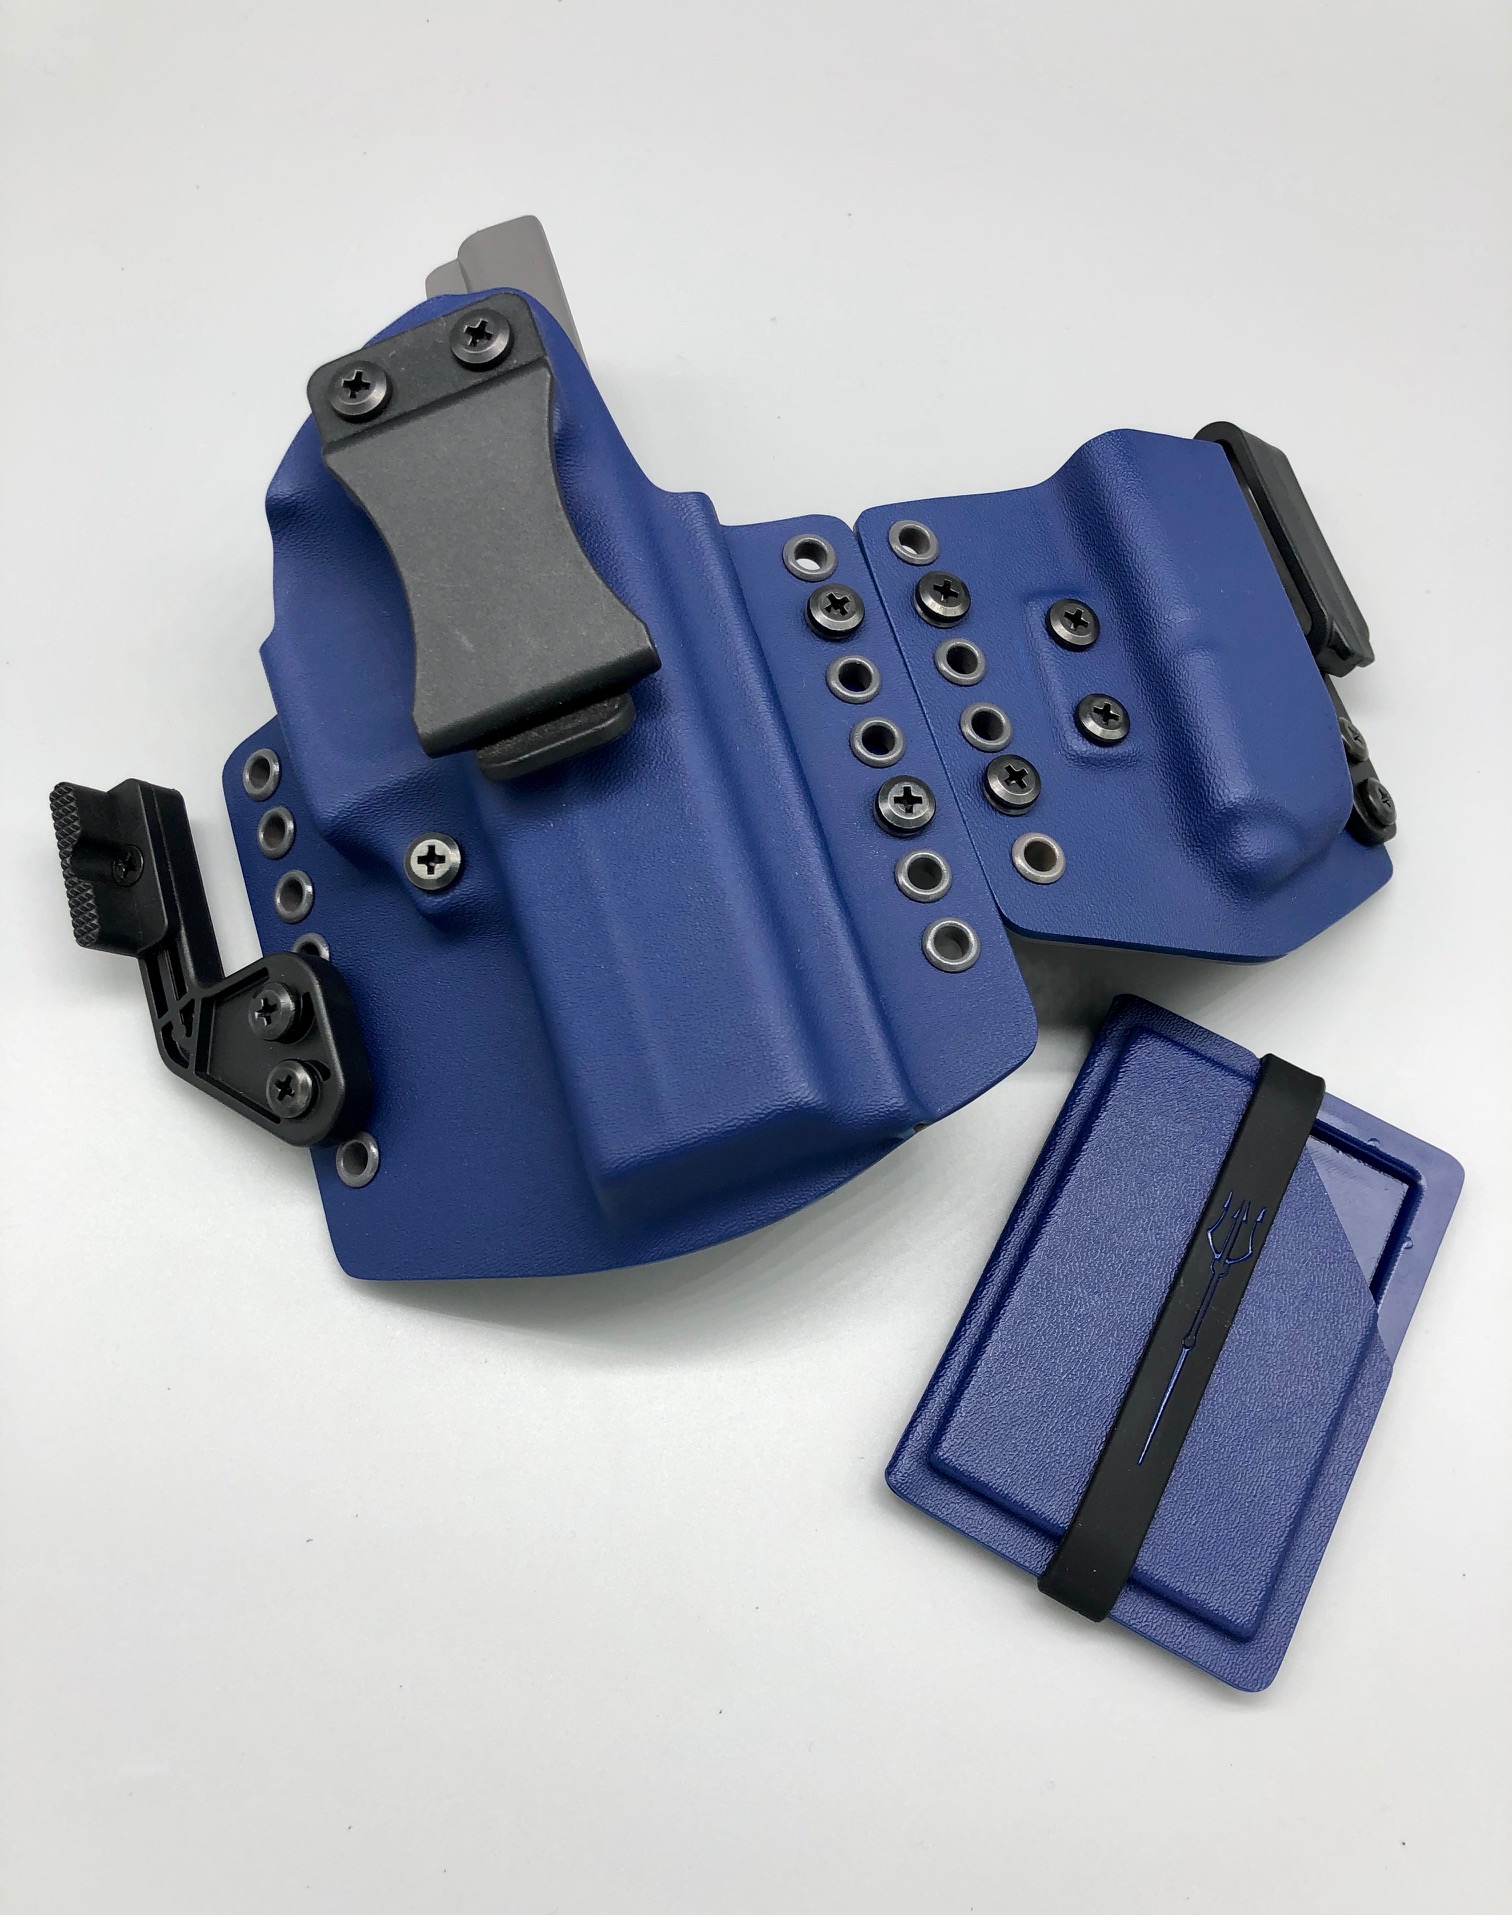 Details about   Tactical IWB OWB Holster Pistol Holster Concealed Carry with Extra Mag Pouch 